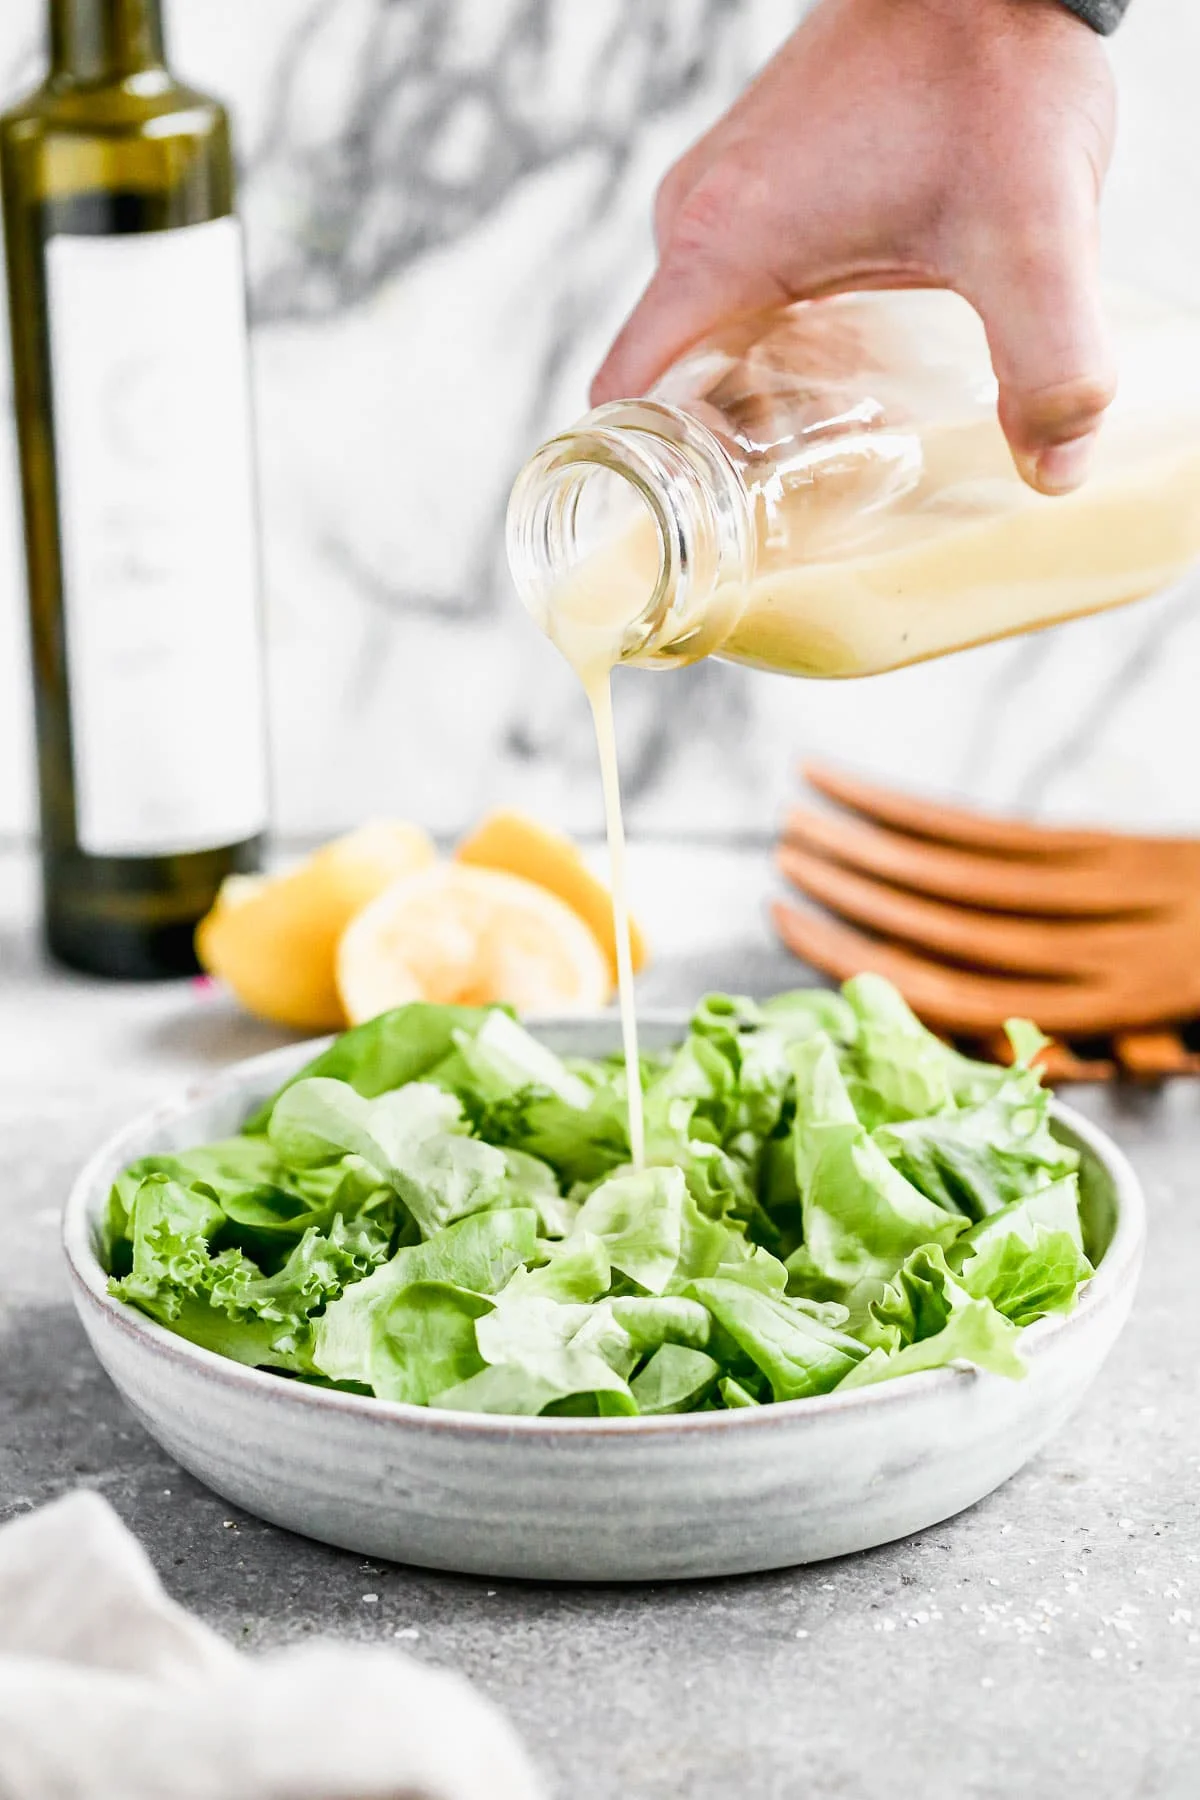 With hints of tang from dijon mustard, a slight sweetness from honey, and of course plenty of citrusy punch from lemon juice, our Easy Lemon Dijon Vinaigrette is something you're going to want to keep in your fridge all year long. I'm also willing to bet the mere five ingredients required for this easy dressing are loitering around in your pantry this very minute. 